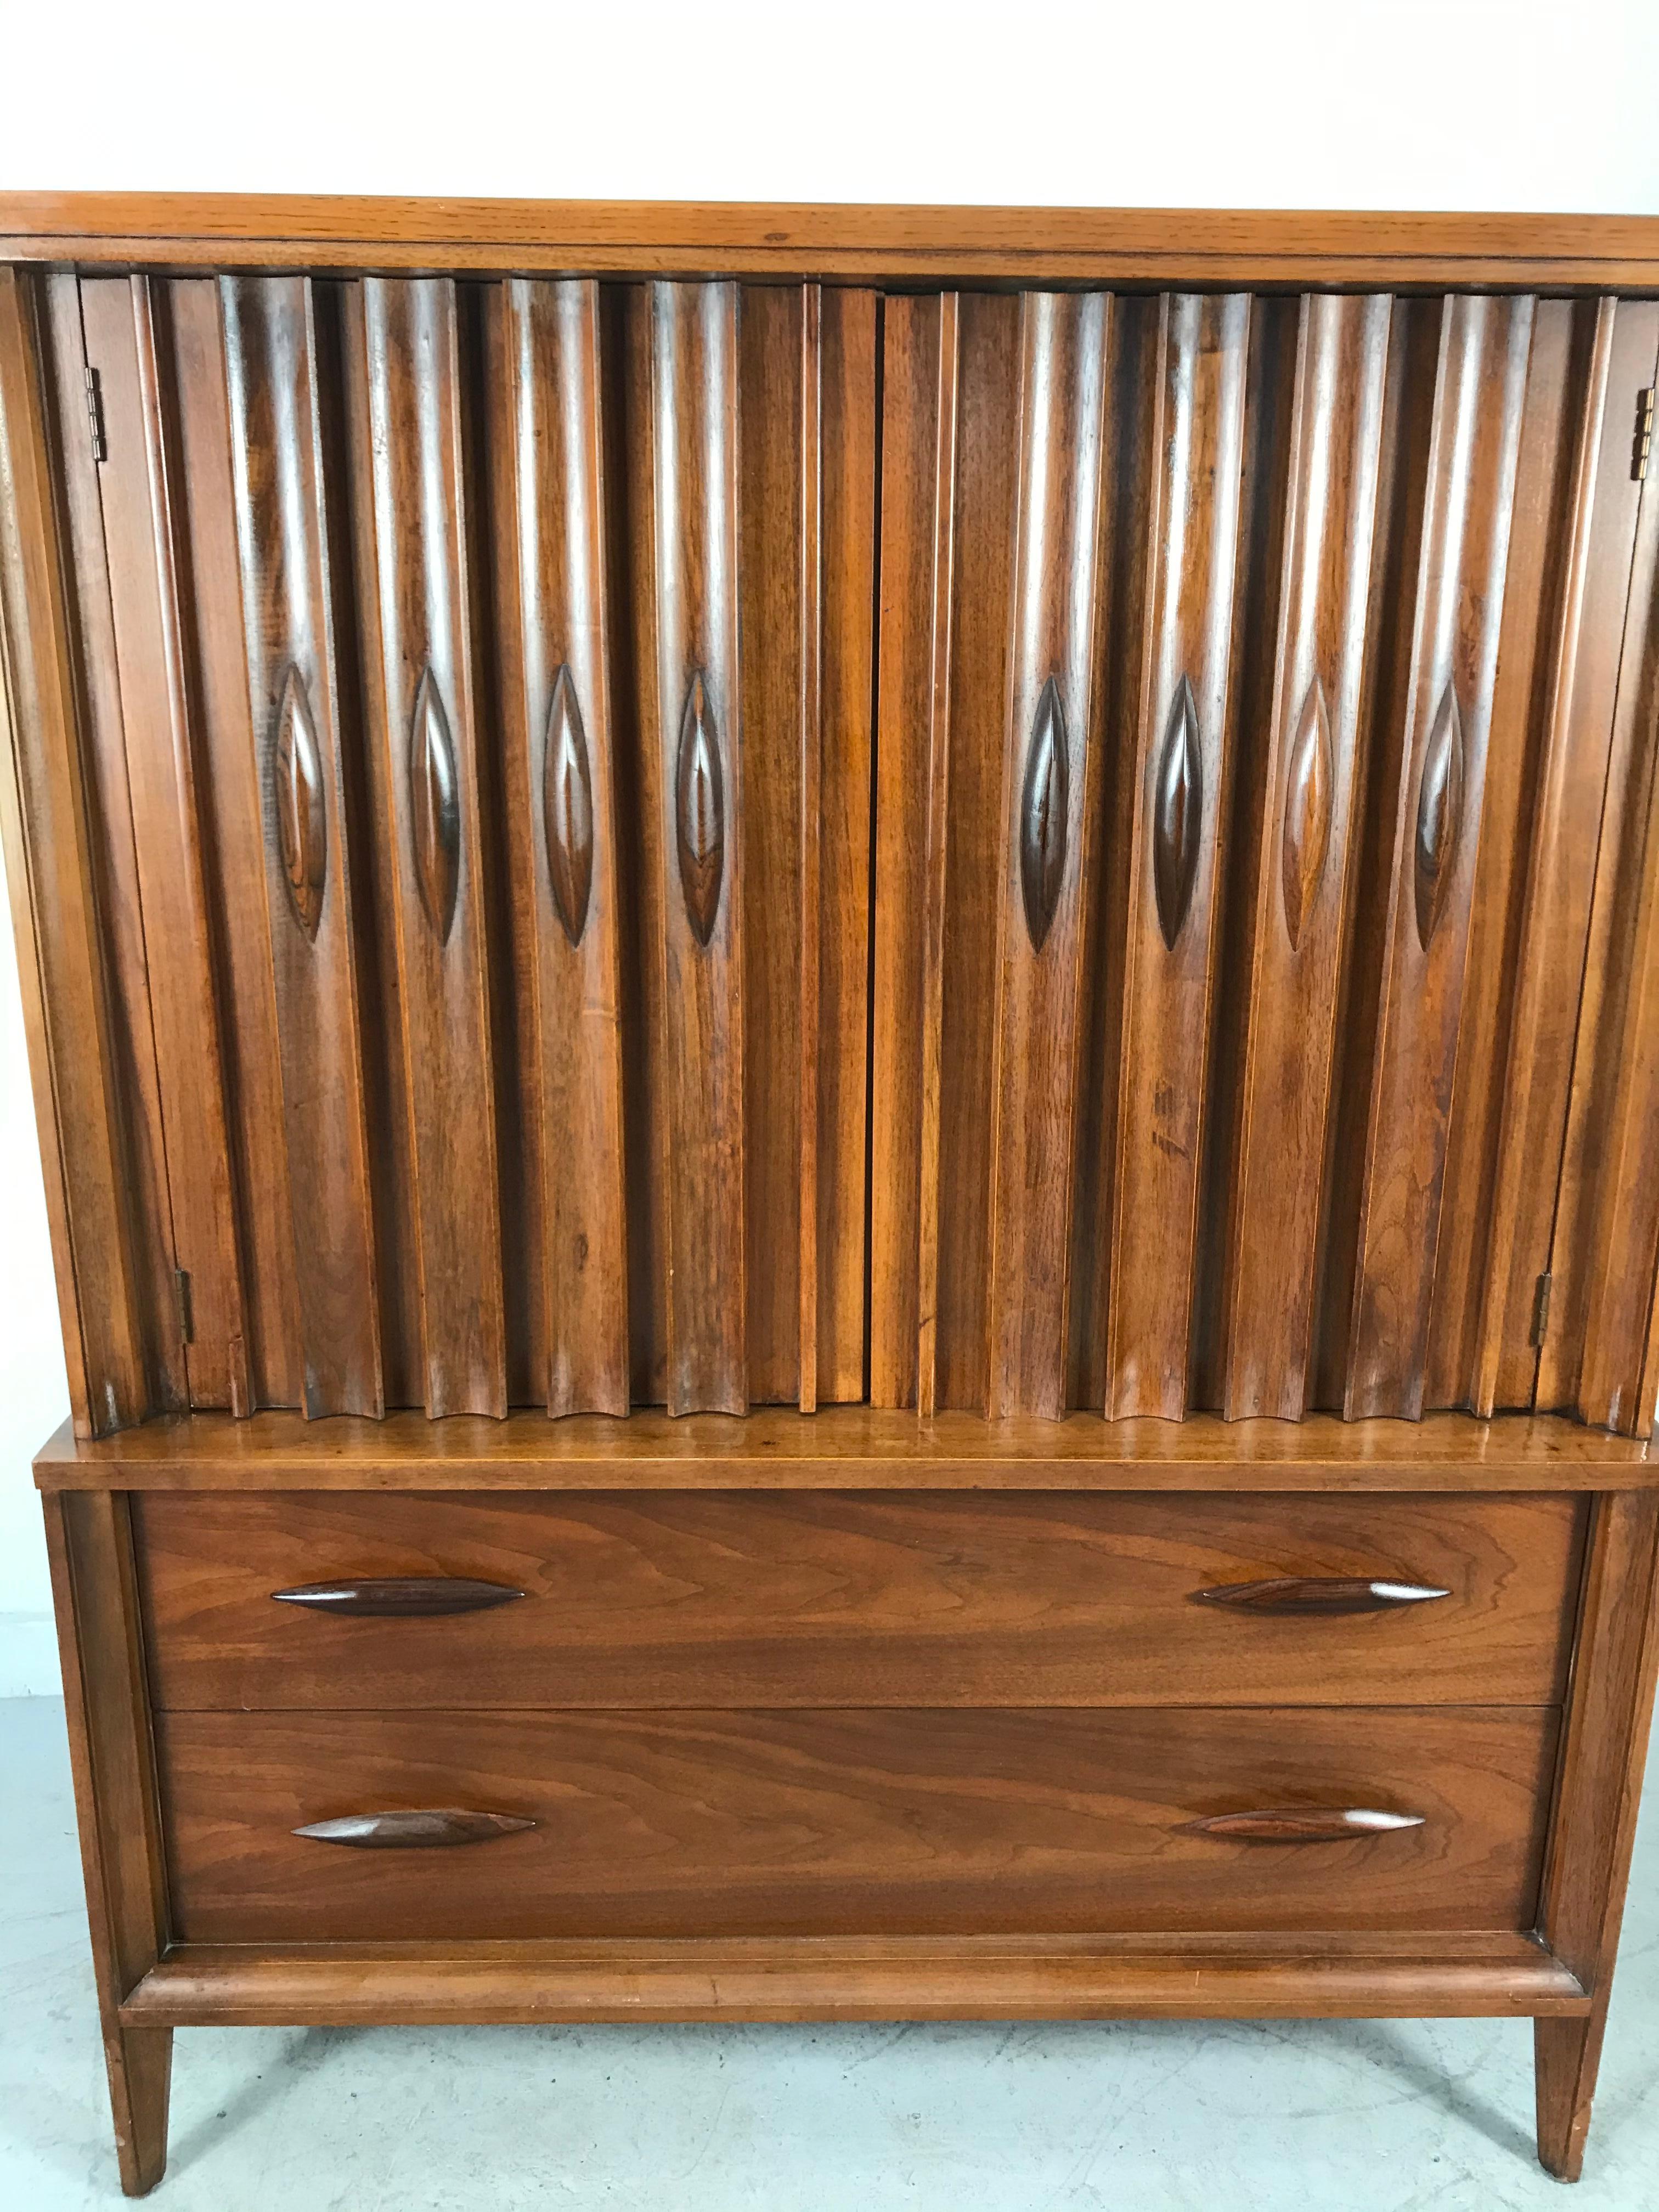 Mid-20th Century Classic Midcentury Walnut 6 Drawer Chest, Stunning, Sculptural, Vaughan Designs For Sale